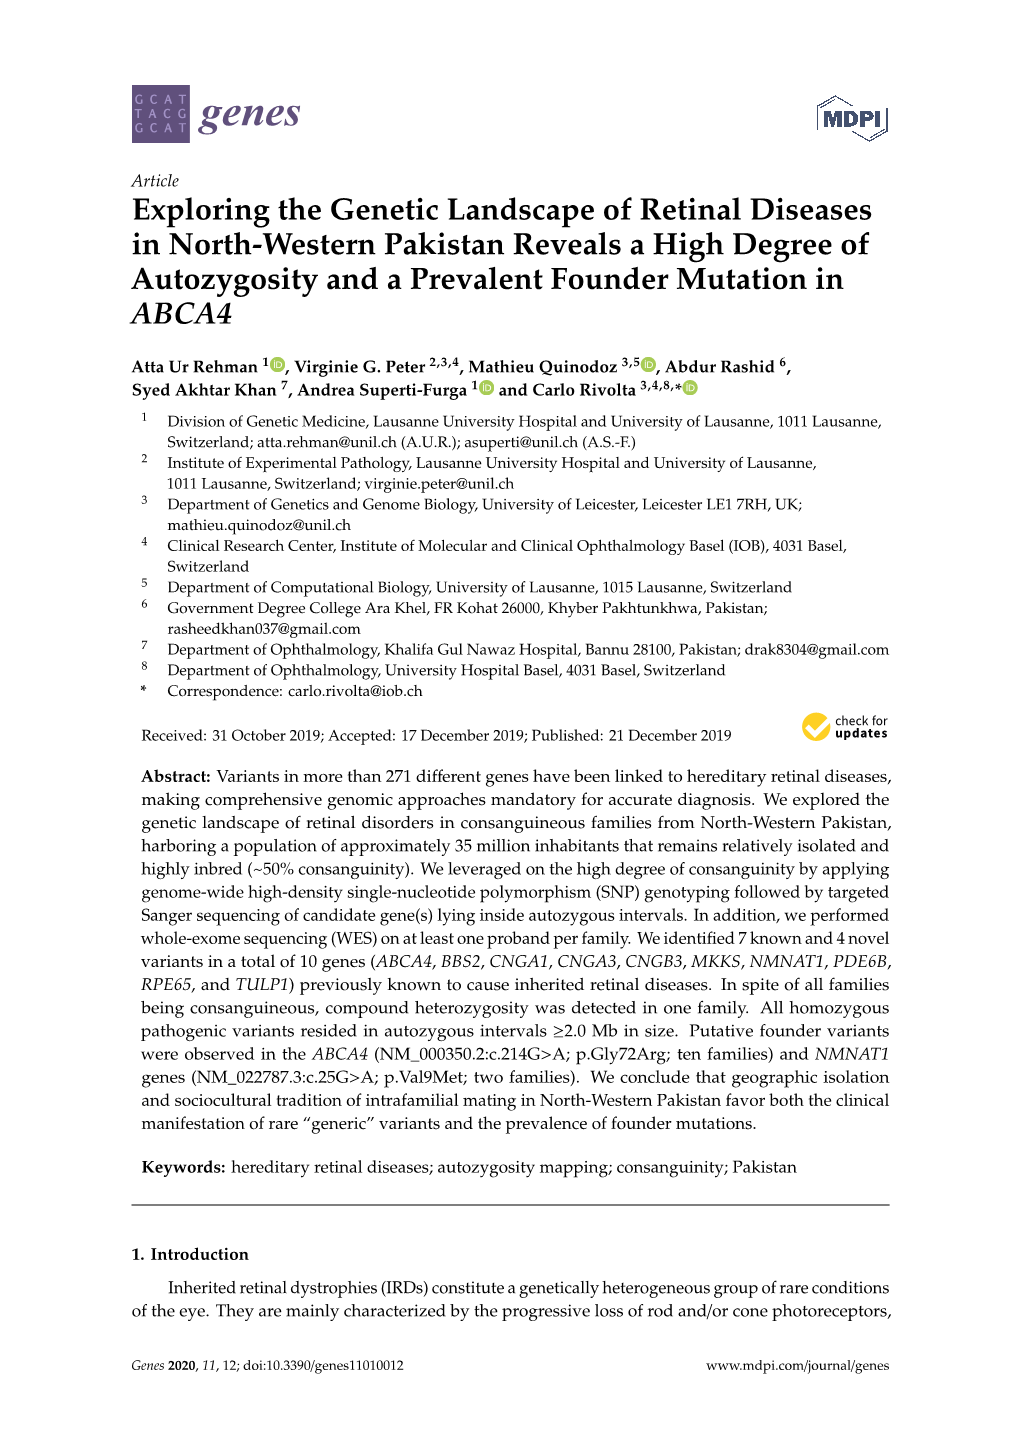 Exploring the Genetic Landscape of Retinal Diseases in North-Western Pakistan Reveals a High Degree of Autozygosity and a Prevalent Founder Mutation in ABCA4